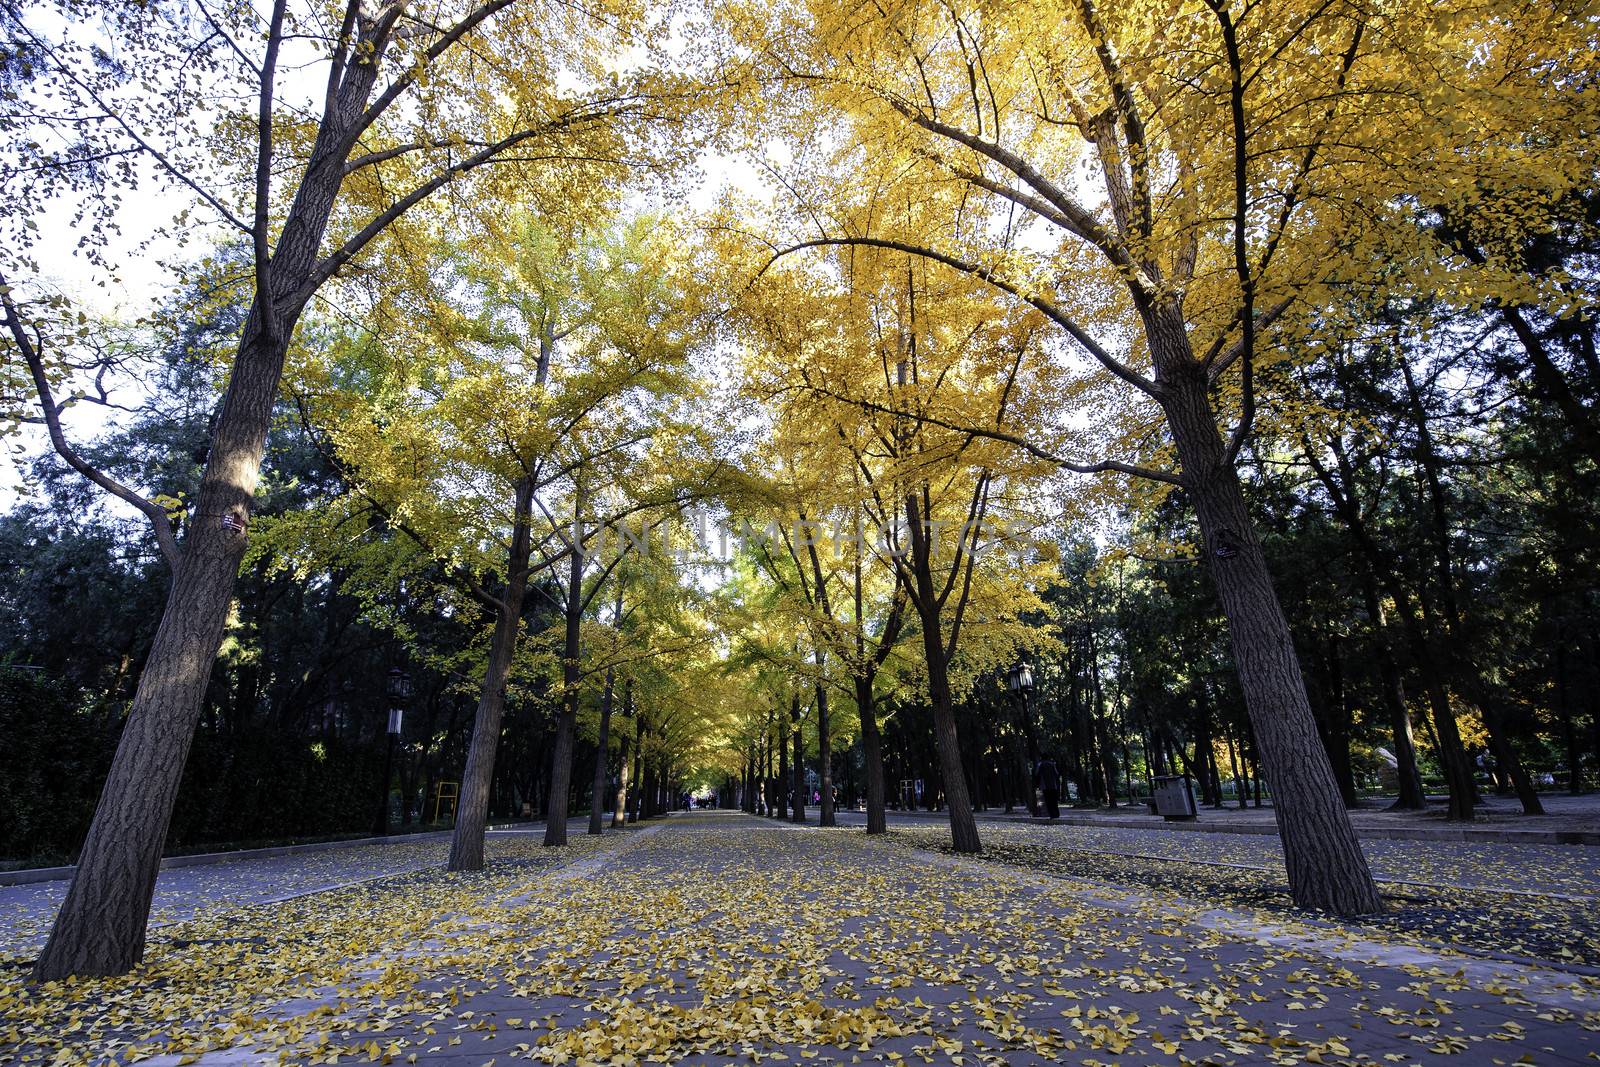 The road of ginkgo trees in Ditan of Beijing, China